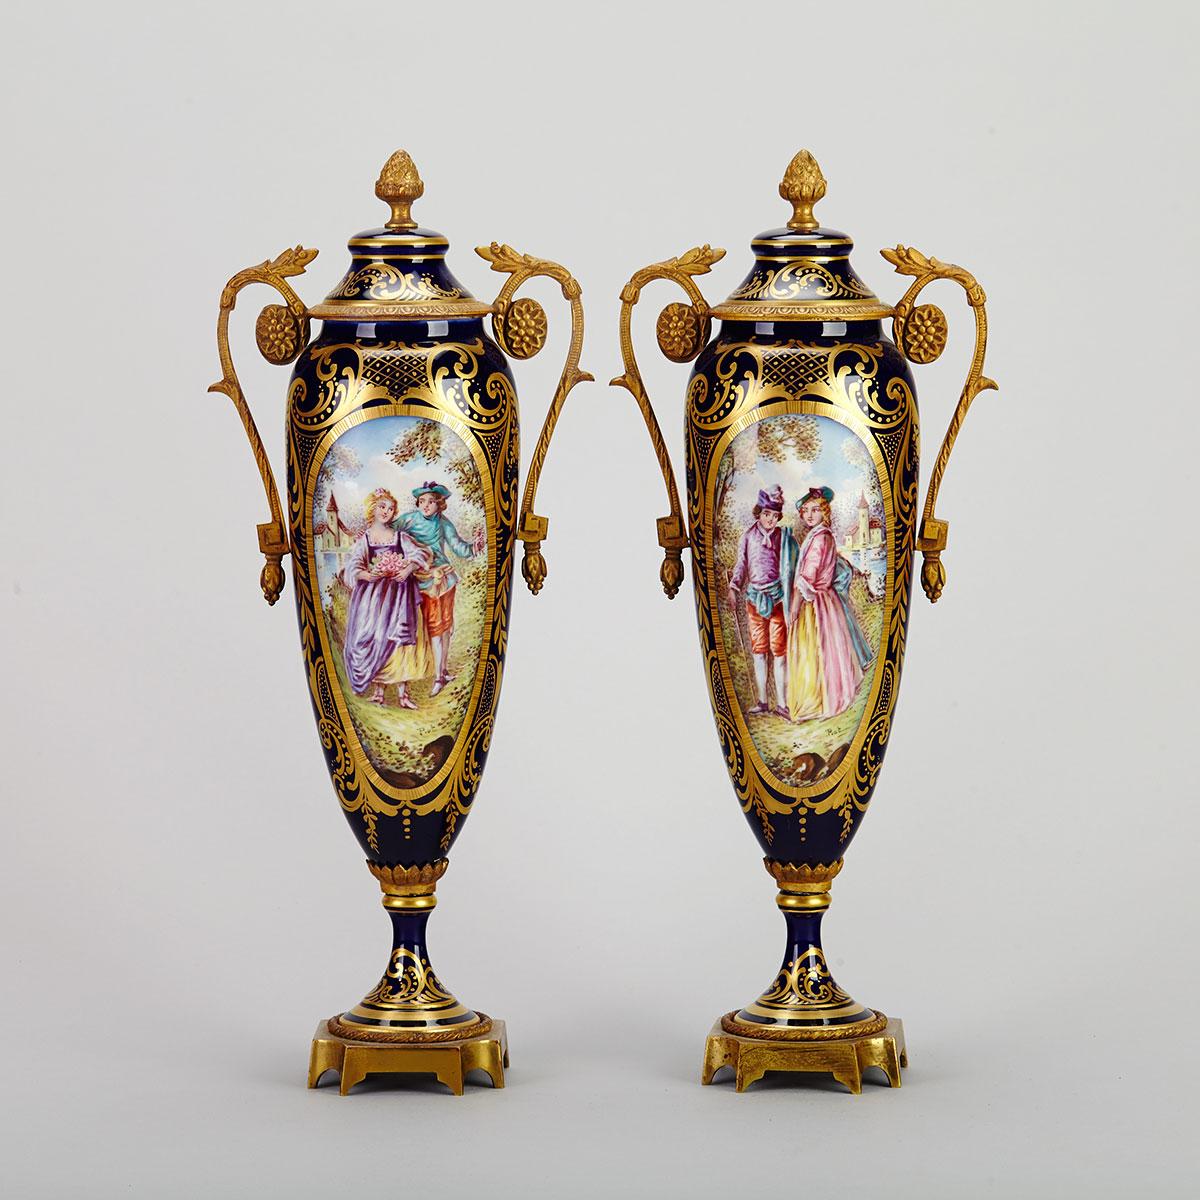 Pair of Ormolu Mounted ‘Sèvres’ Mantle Urns, early 20th century